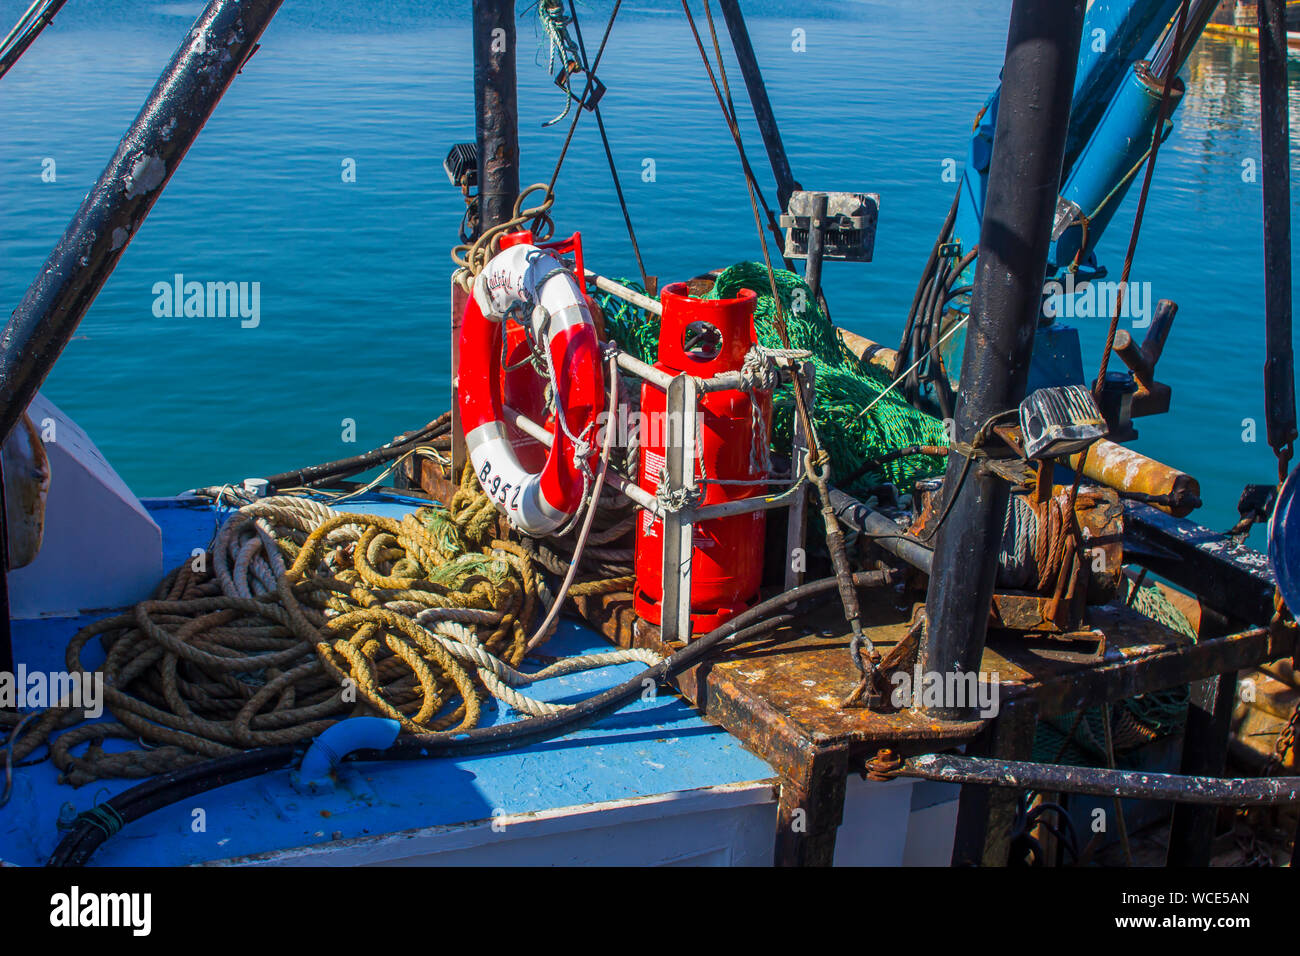 8 August 2019 The clutter stowed on the deck of a working trawler in berthed in Ardglass harbour County Down Northern Ireland Stock Photo